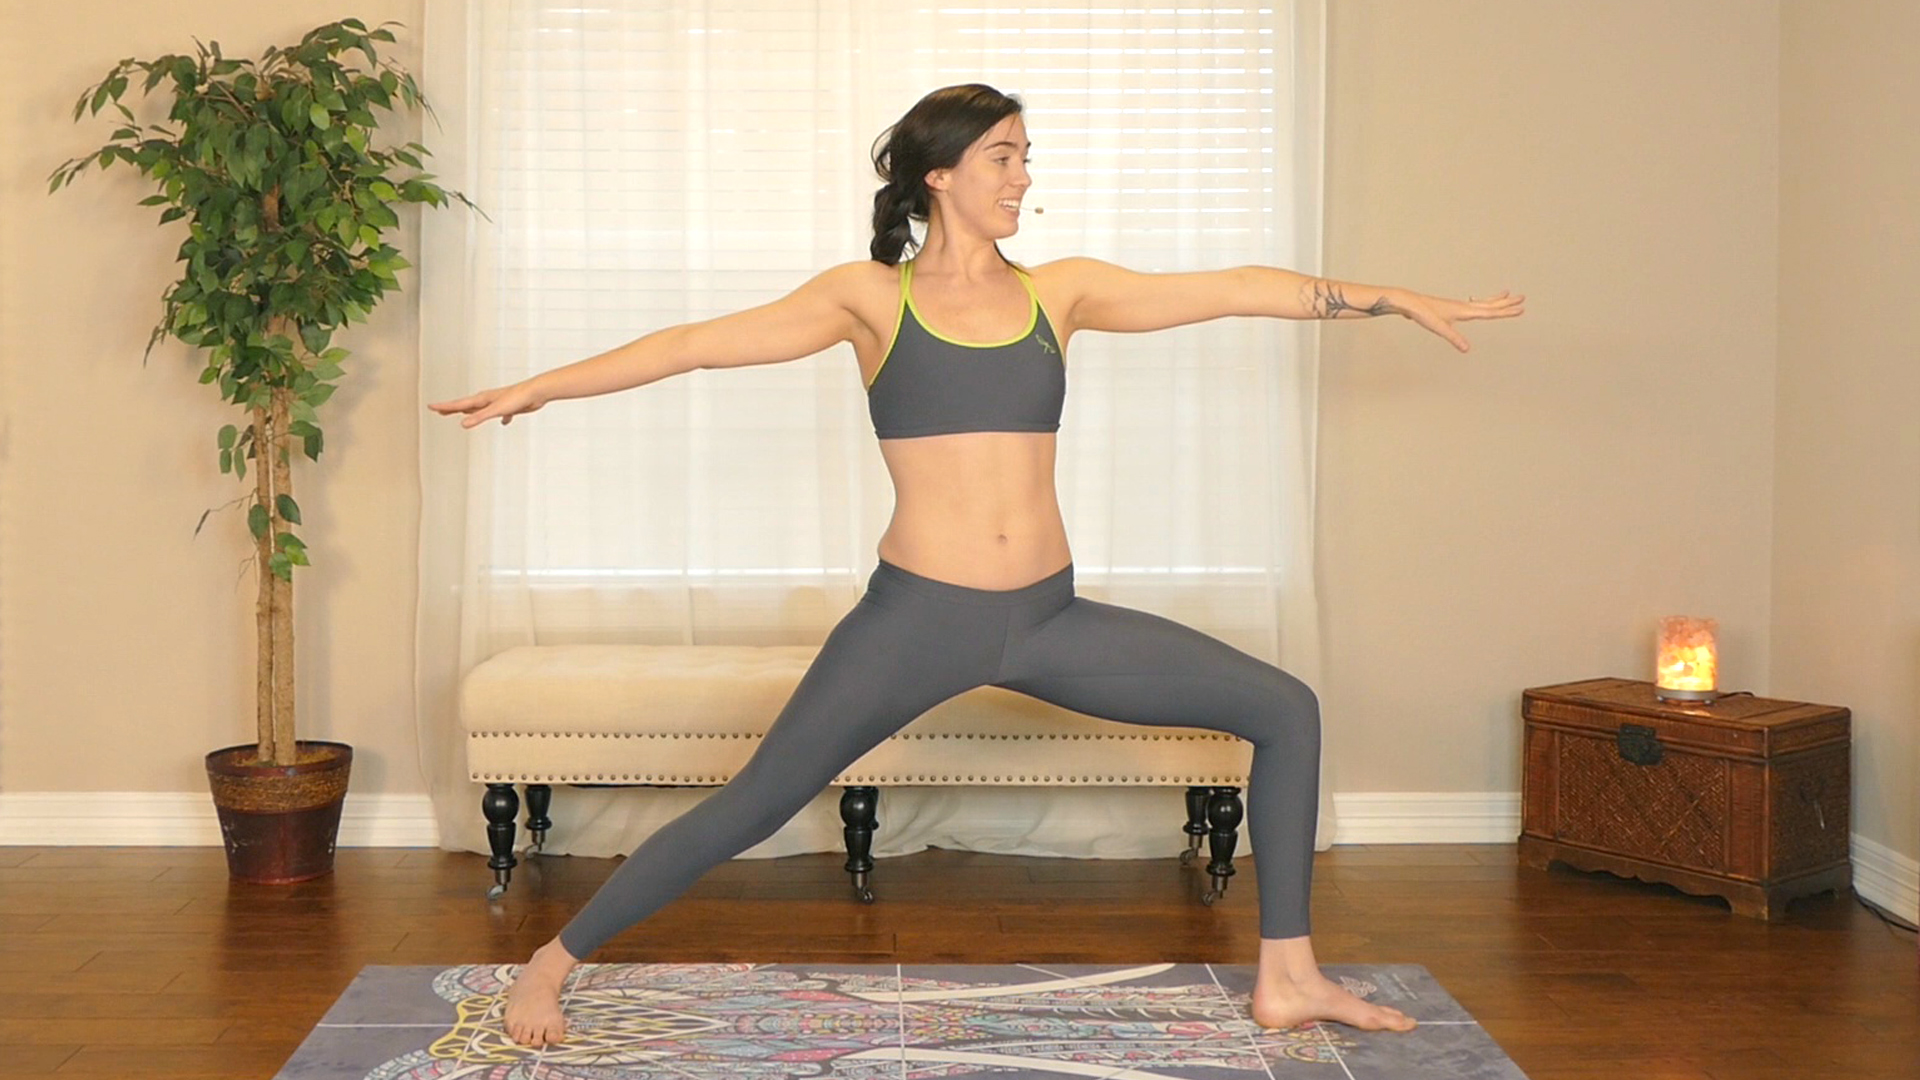 Yoga Sequences for Stress | Poses to Help You Relax During Hectic Times